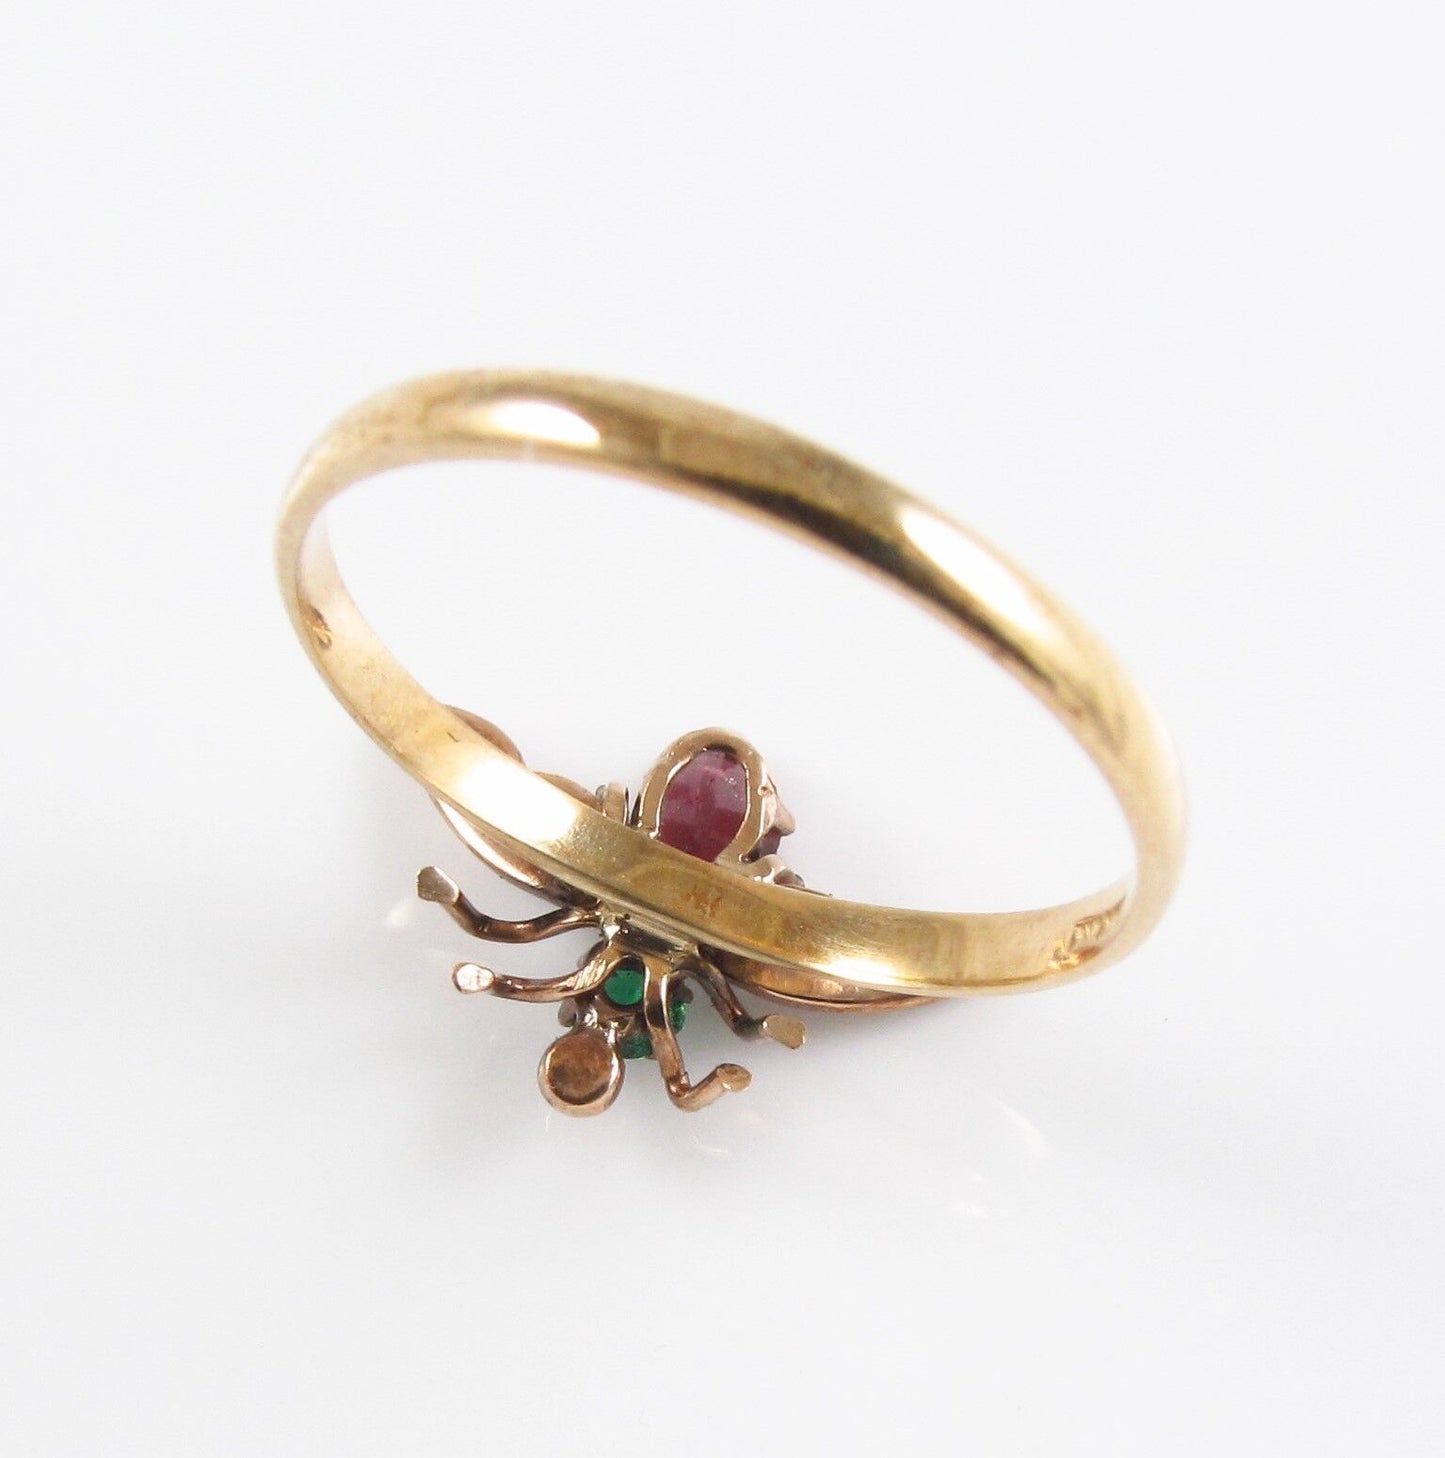 Antique Victorian Ladies 14k Gold Paste Stone & Pearl Insect Fly Bee Ring Size 7